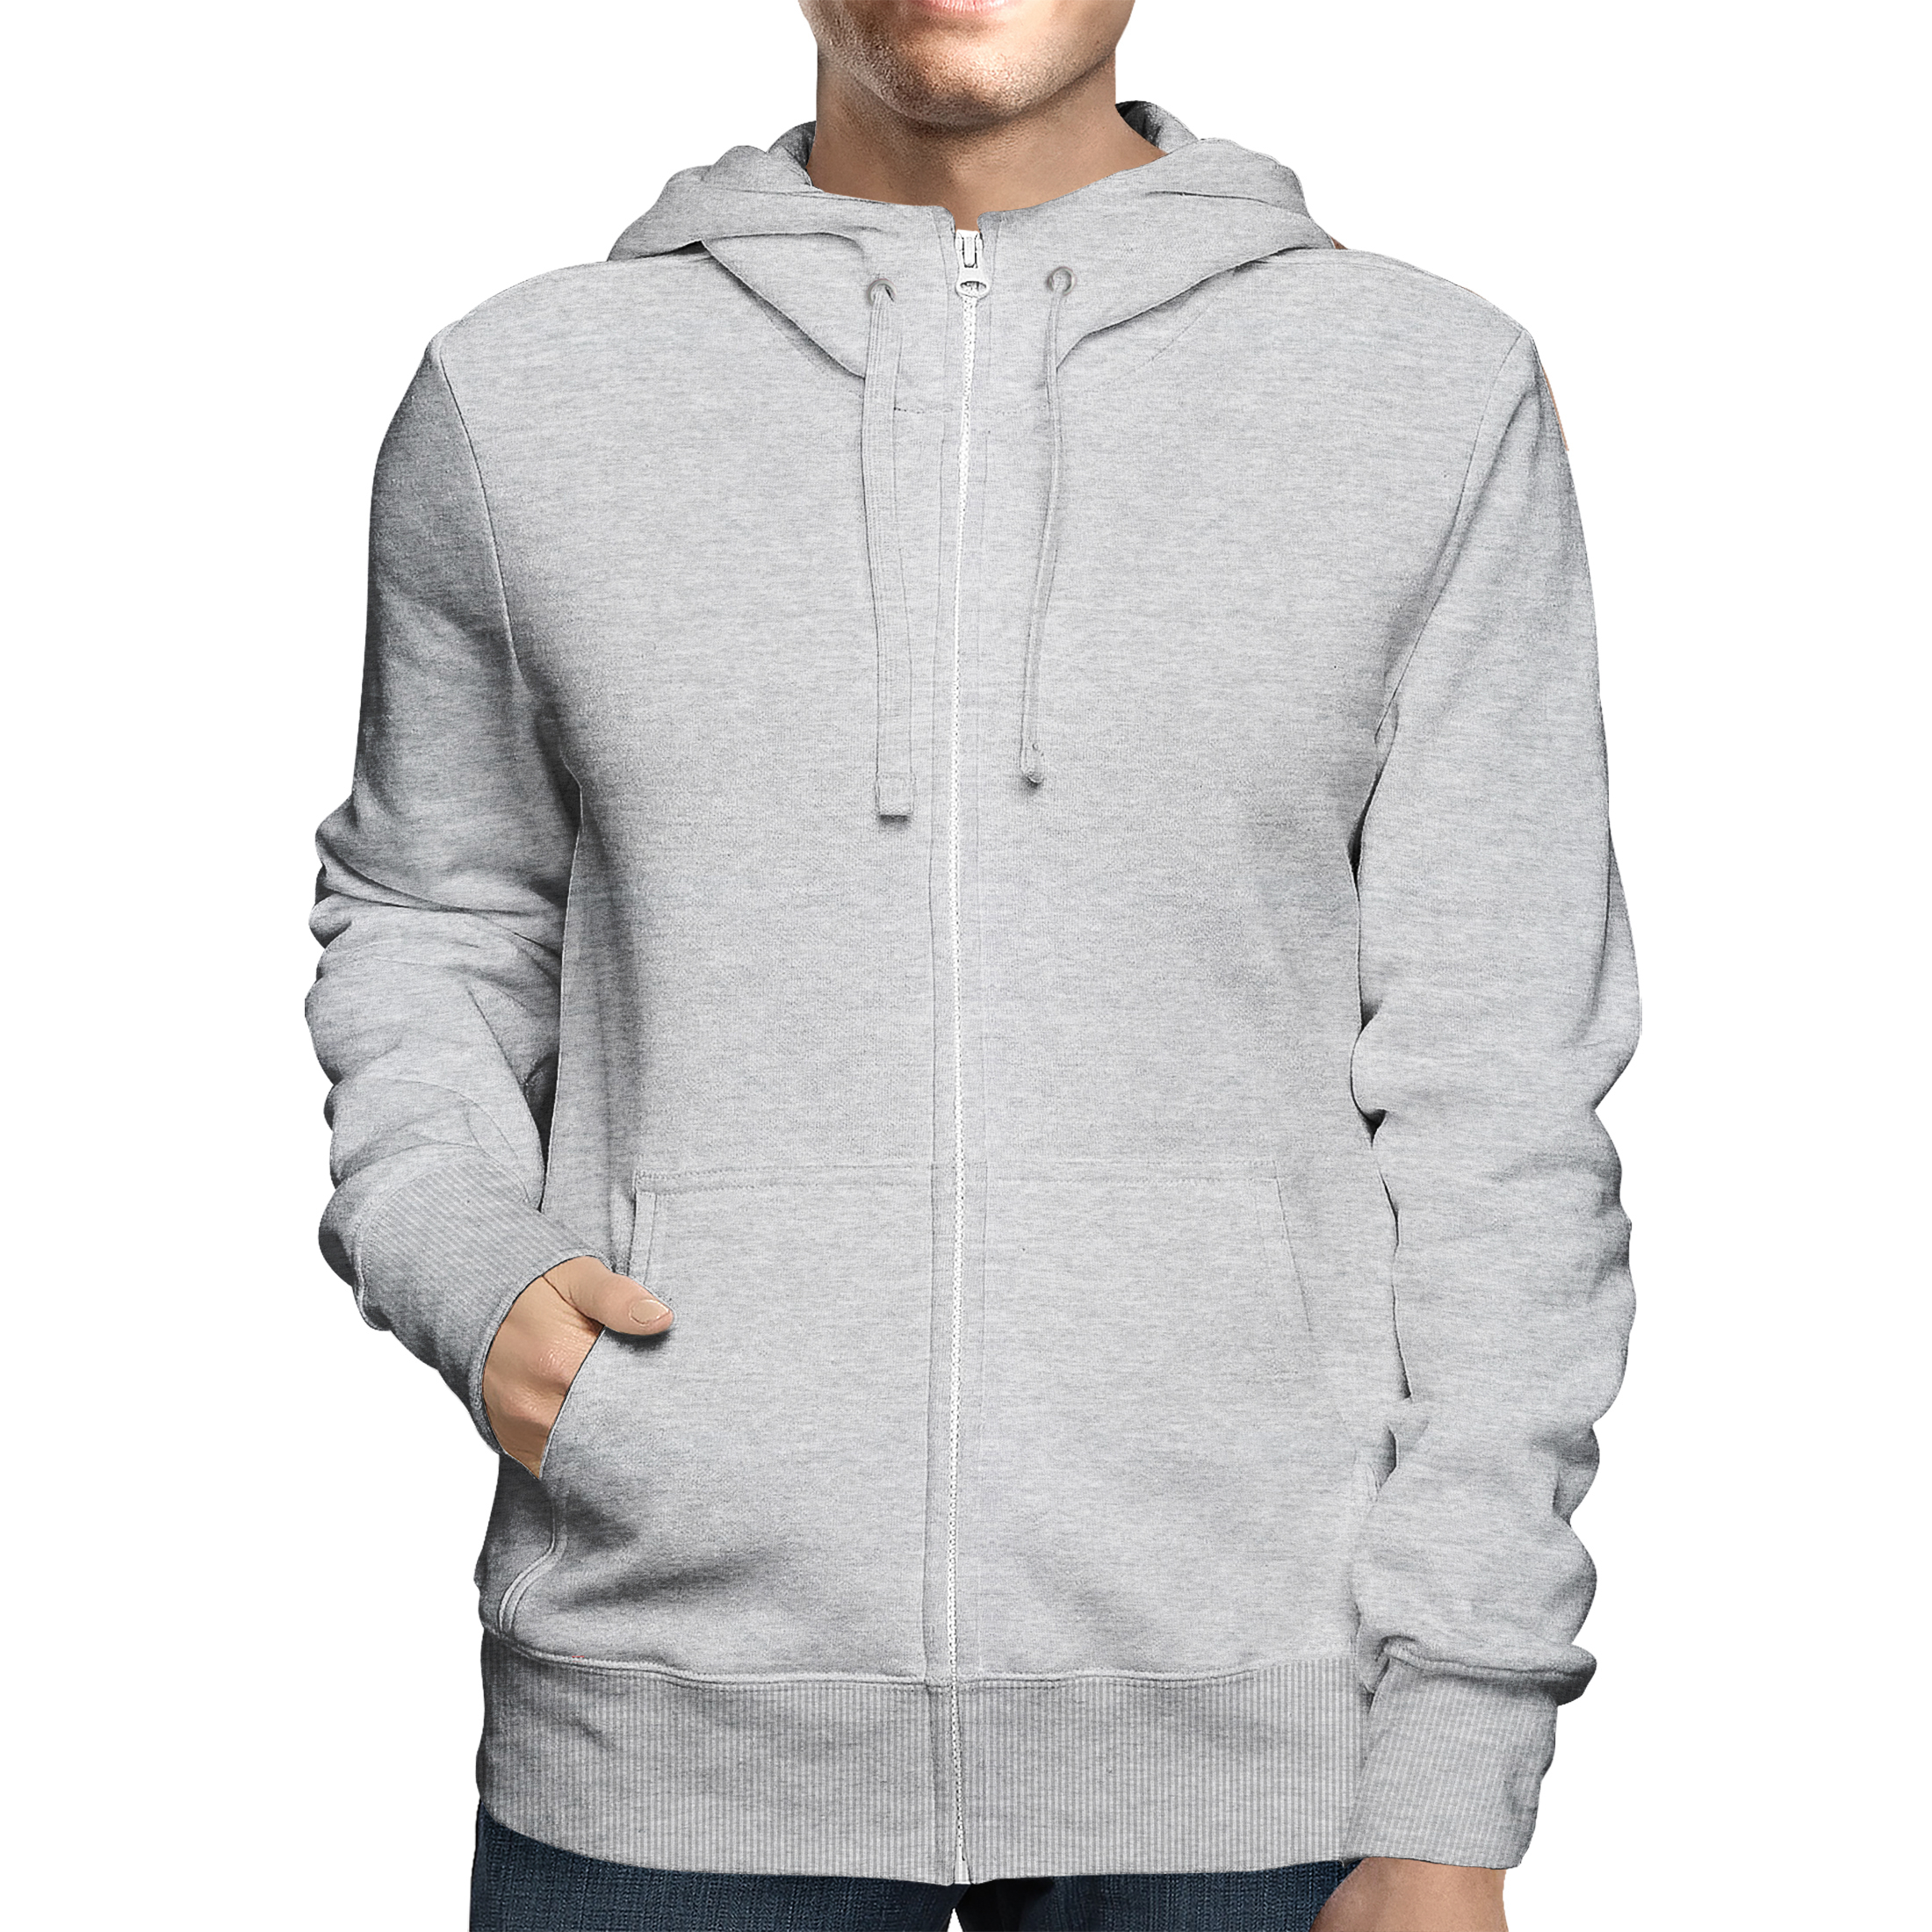 2-Pack: Men's Full Zip Up Fleece-Lined Hoodie Sweatshirt (Big & Tall Size Available) - Gray, 2x-large